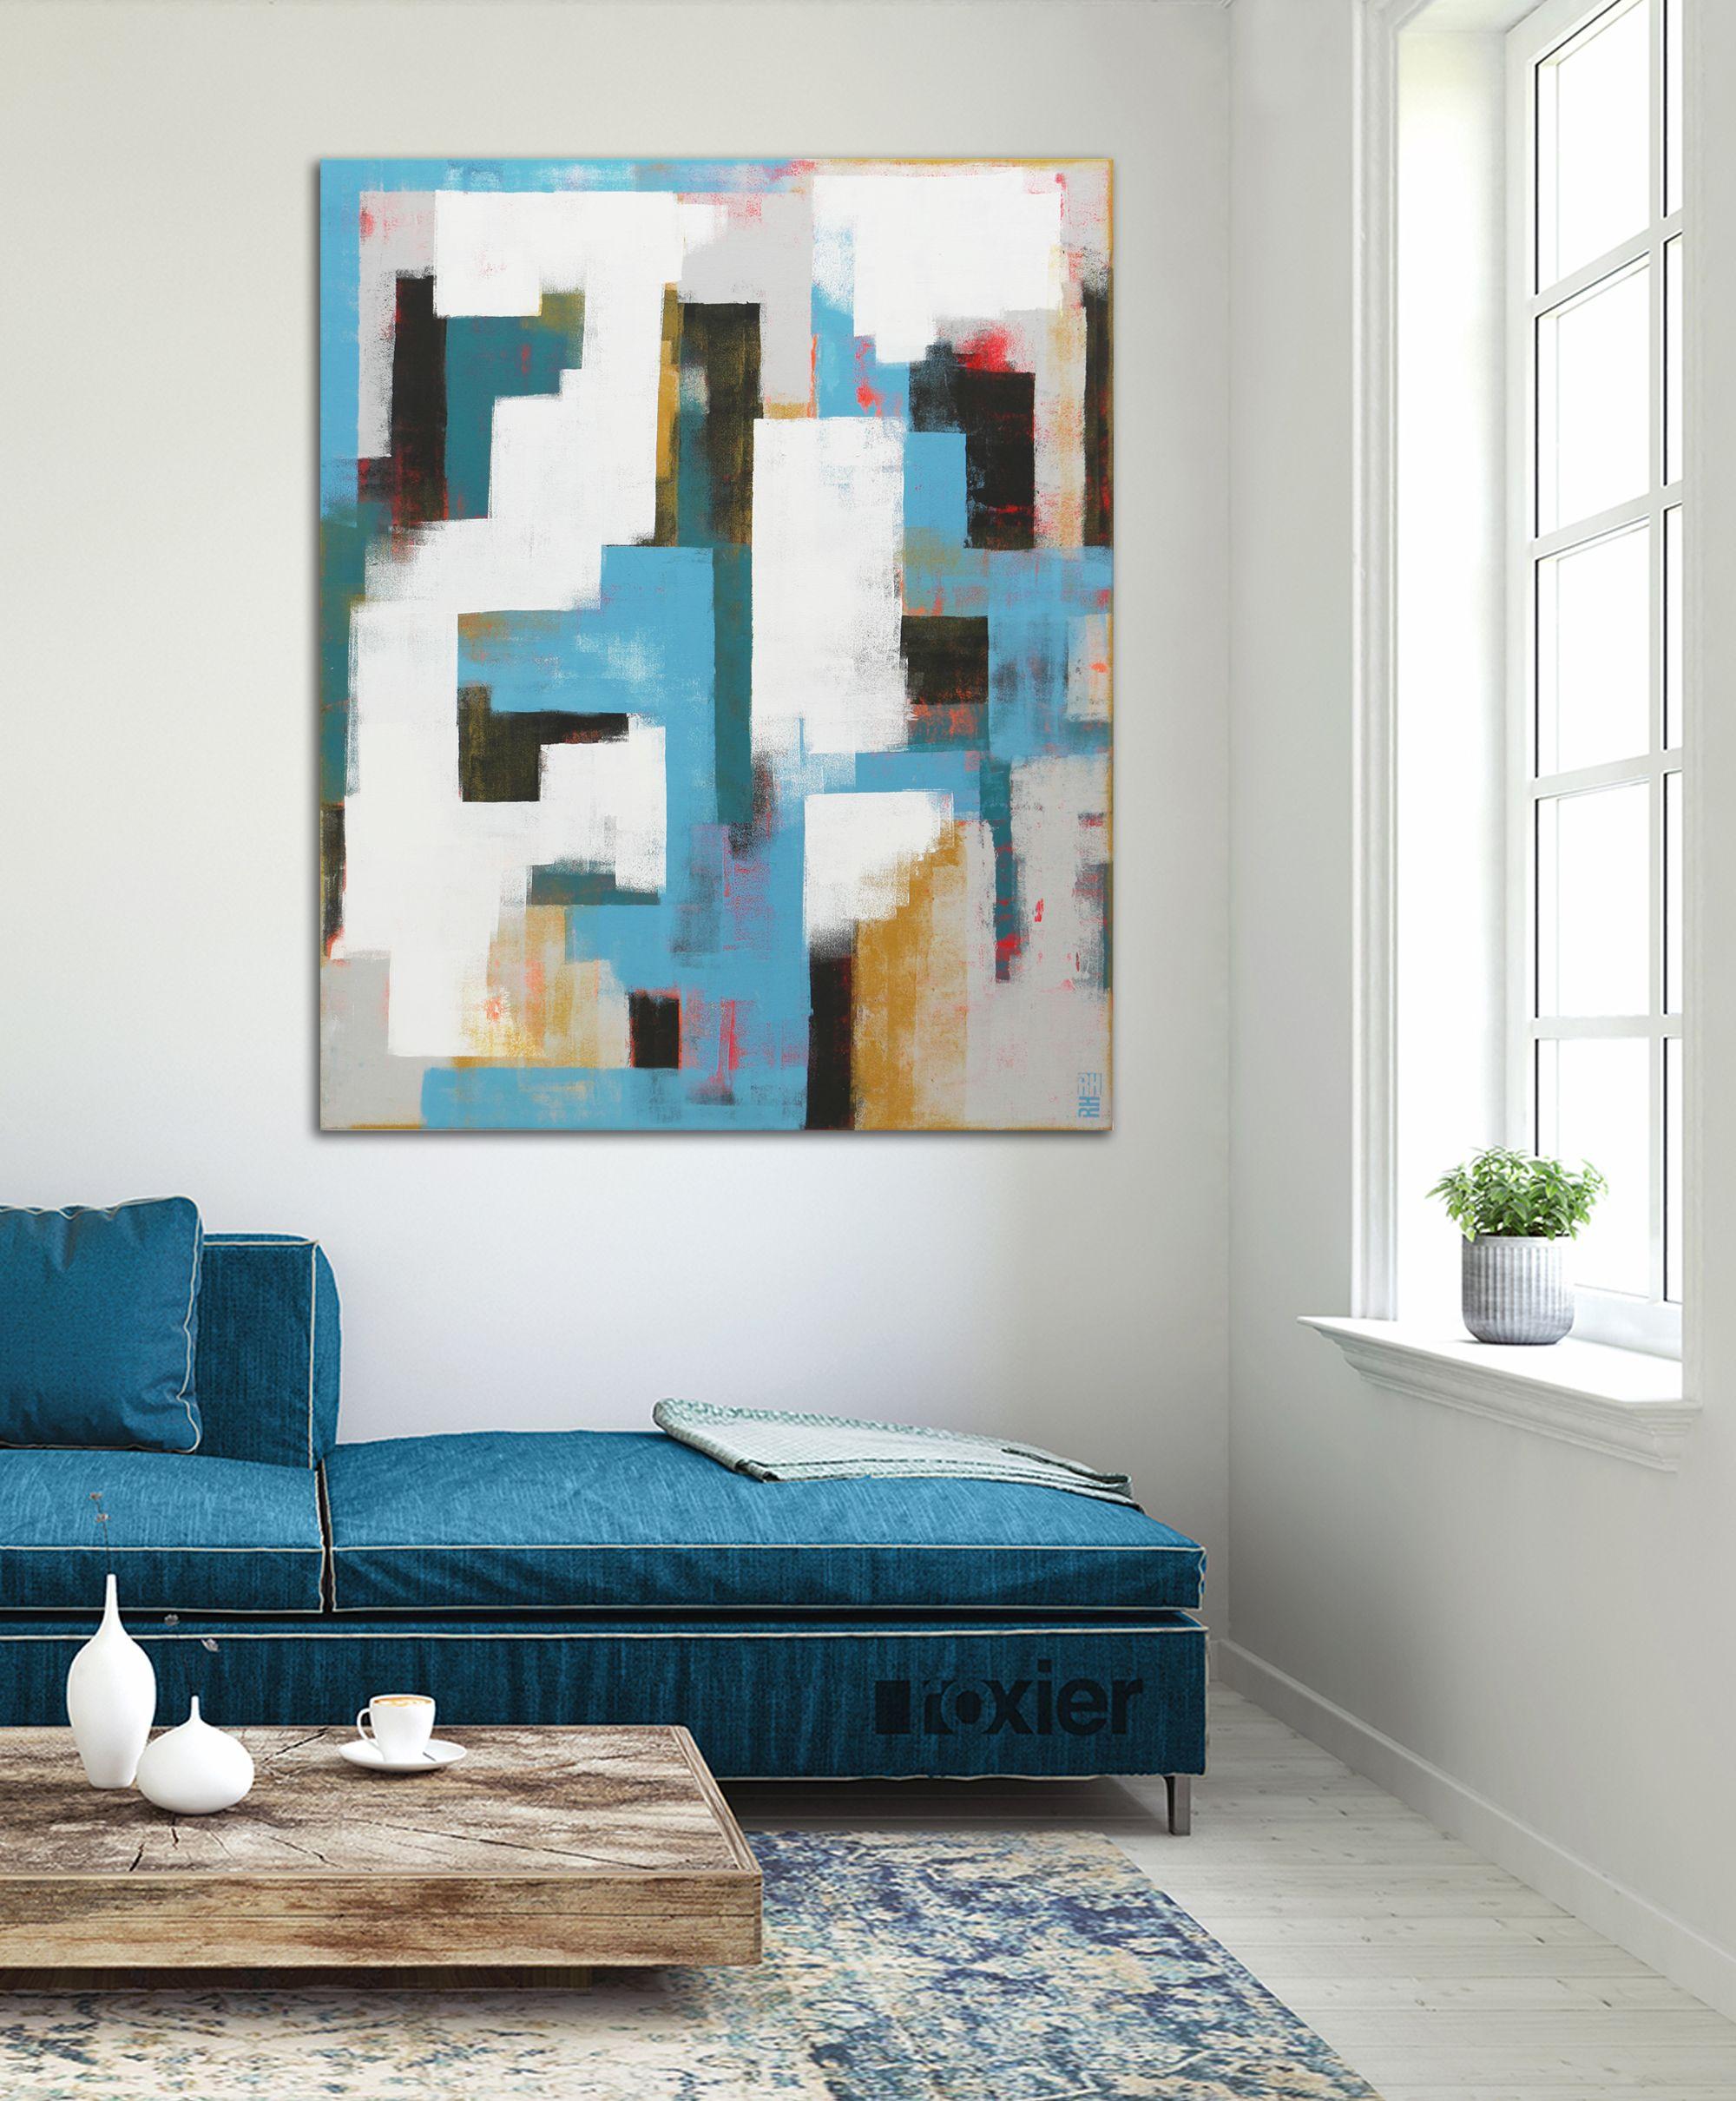 Acrylic Abstract Painting, Original artwork created by Ronald Hunter.    A balanced abstract composition with blue an grey tones, made with many layers of acrylic paint.    You will receive the artwork ready to hang on a wooden frame with a hook on